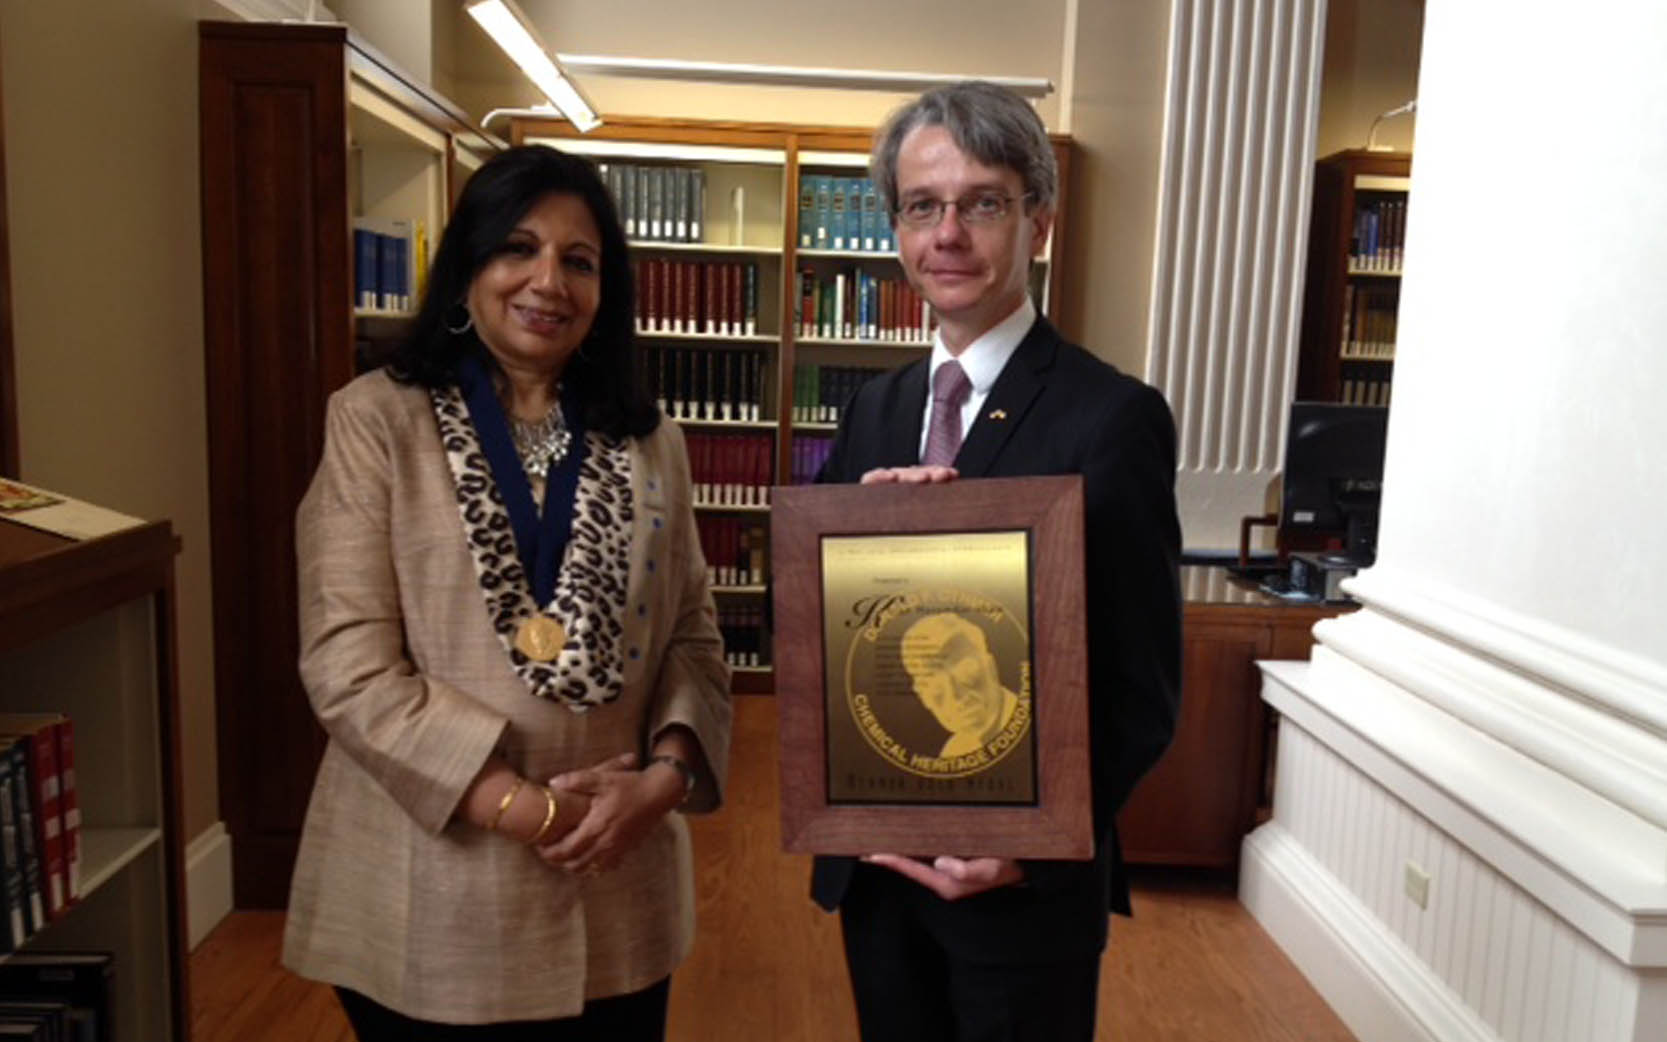 Awarded the prestigious Othmer Gold Medal by the Chemical Heritage Foundation, Philadelphia, PA in 2014